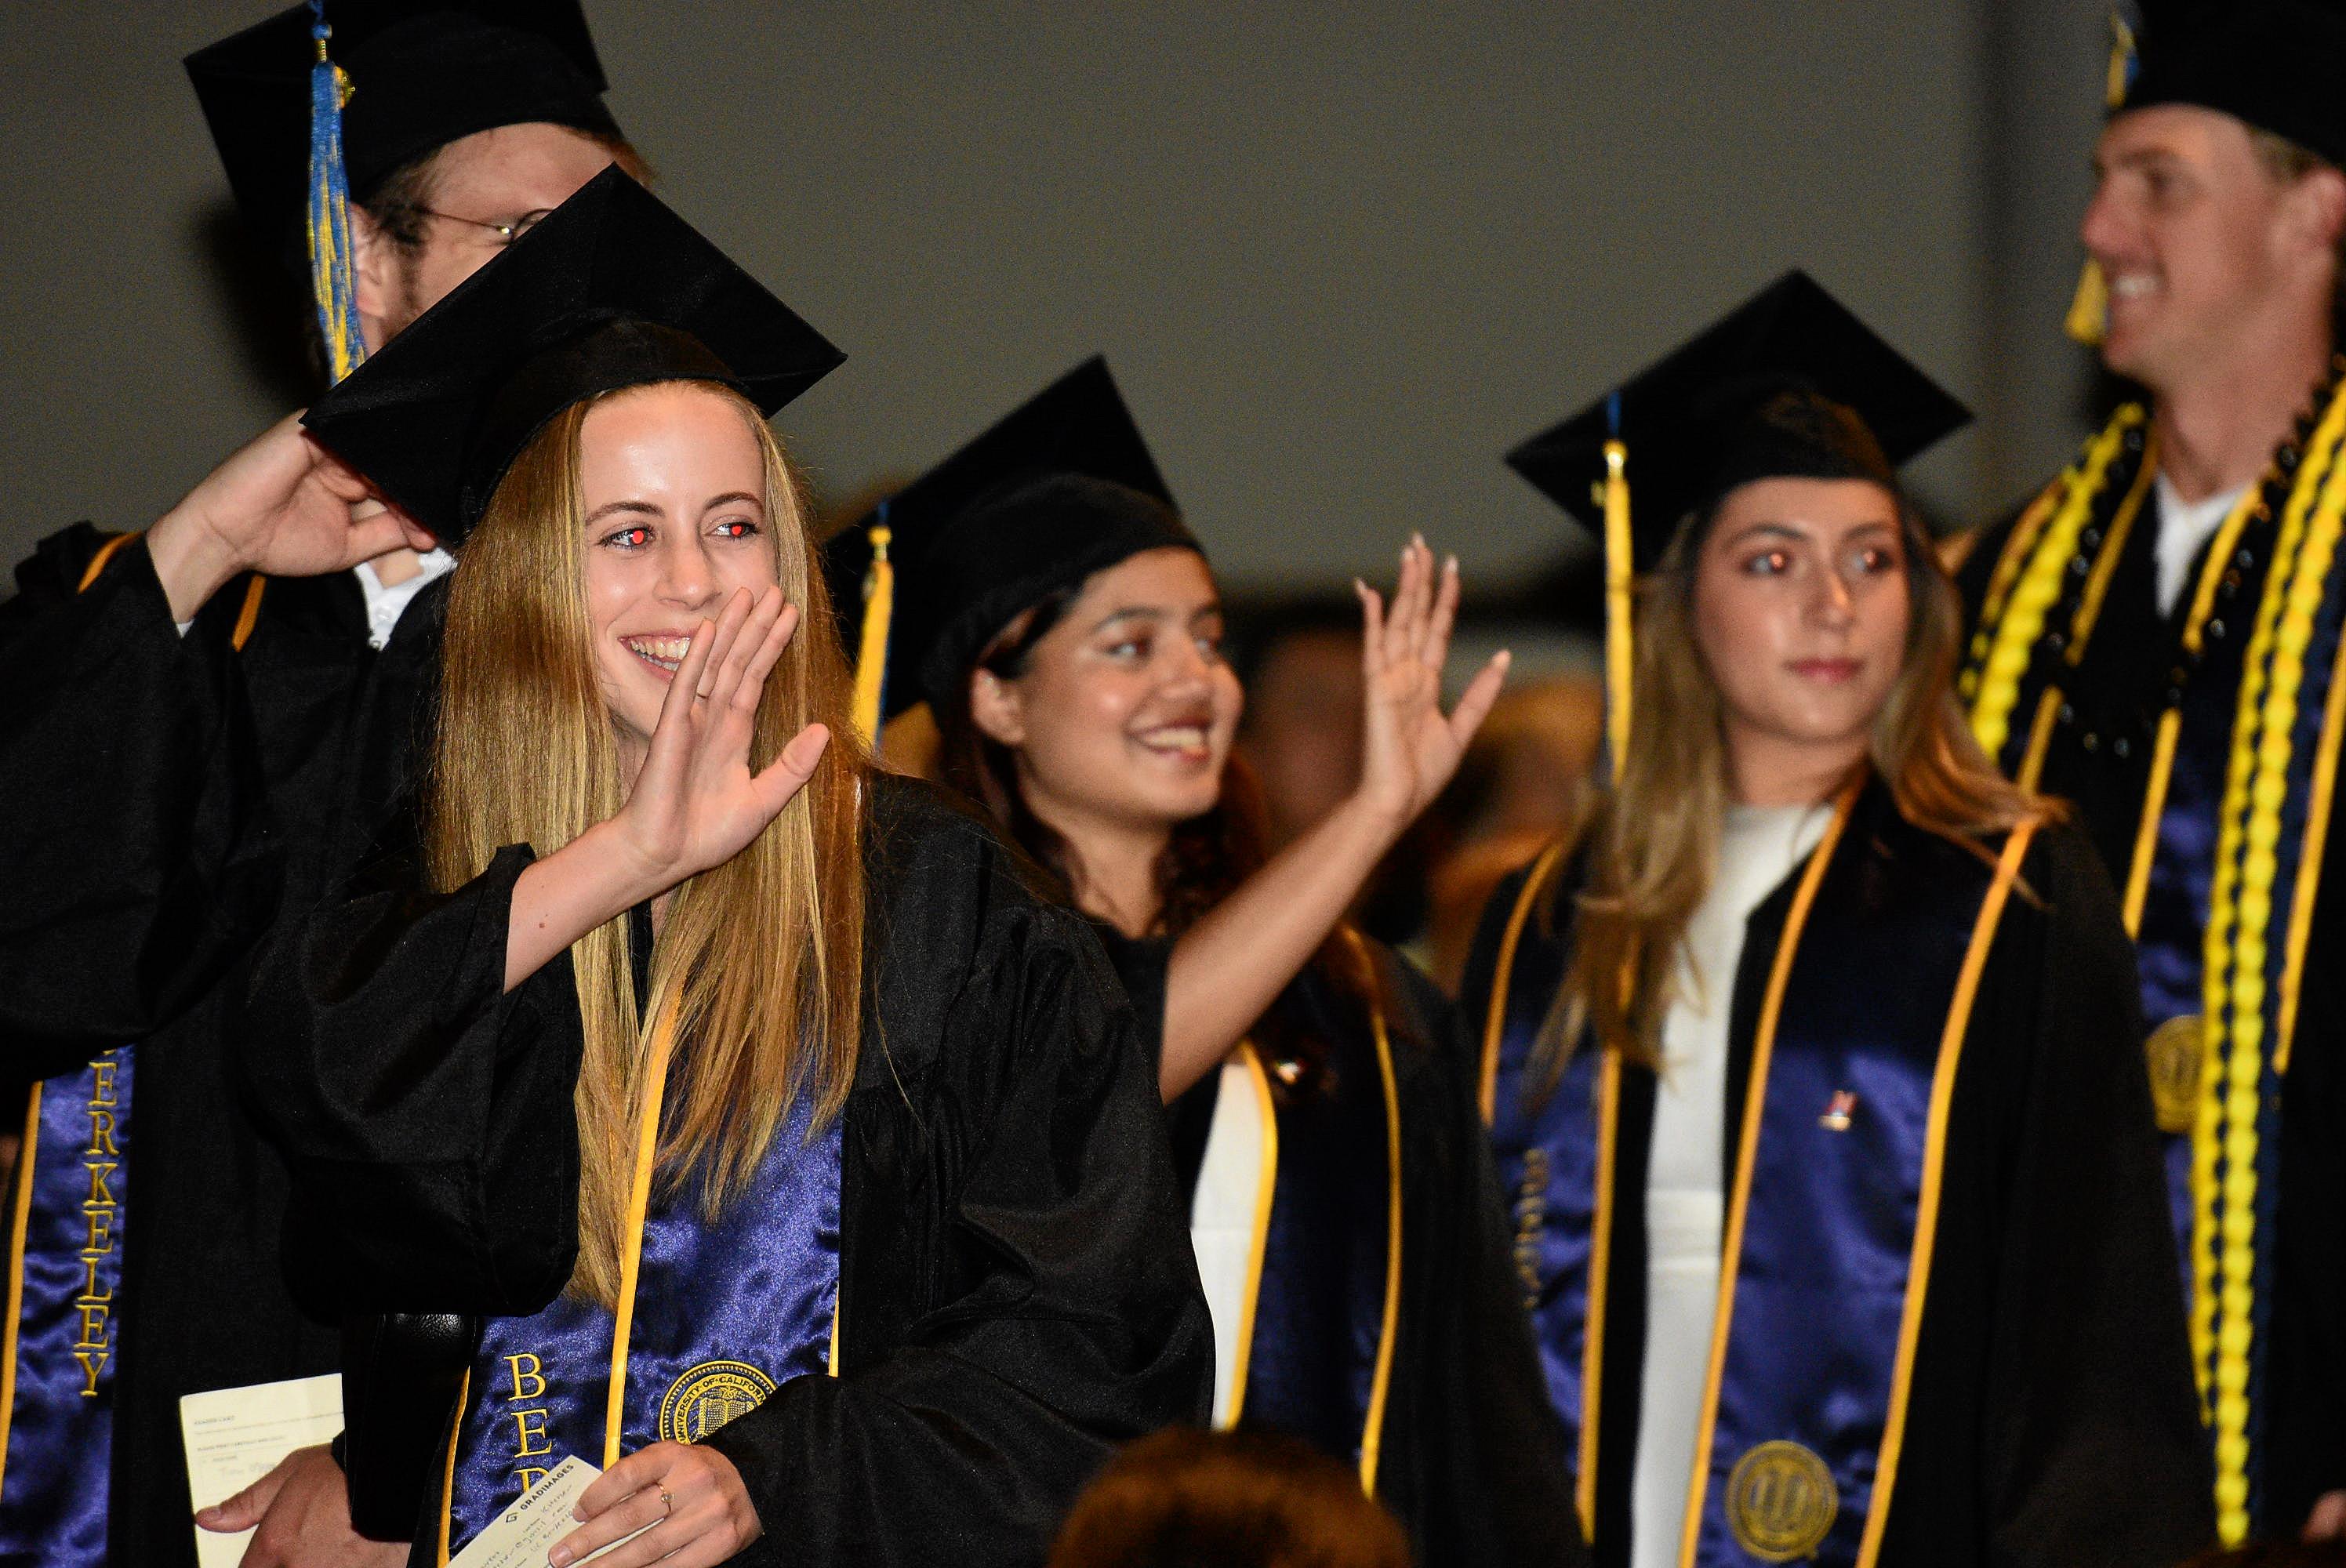 Grads wave to audience